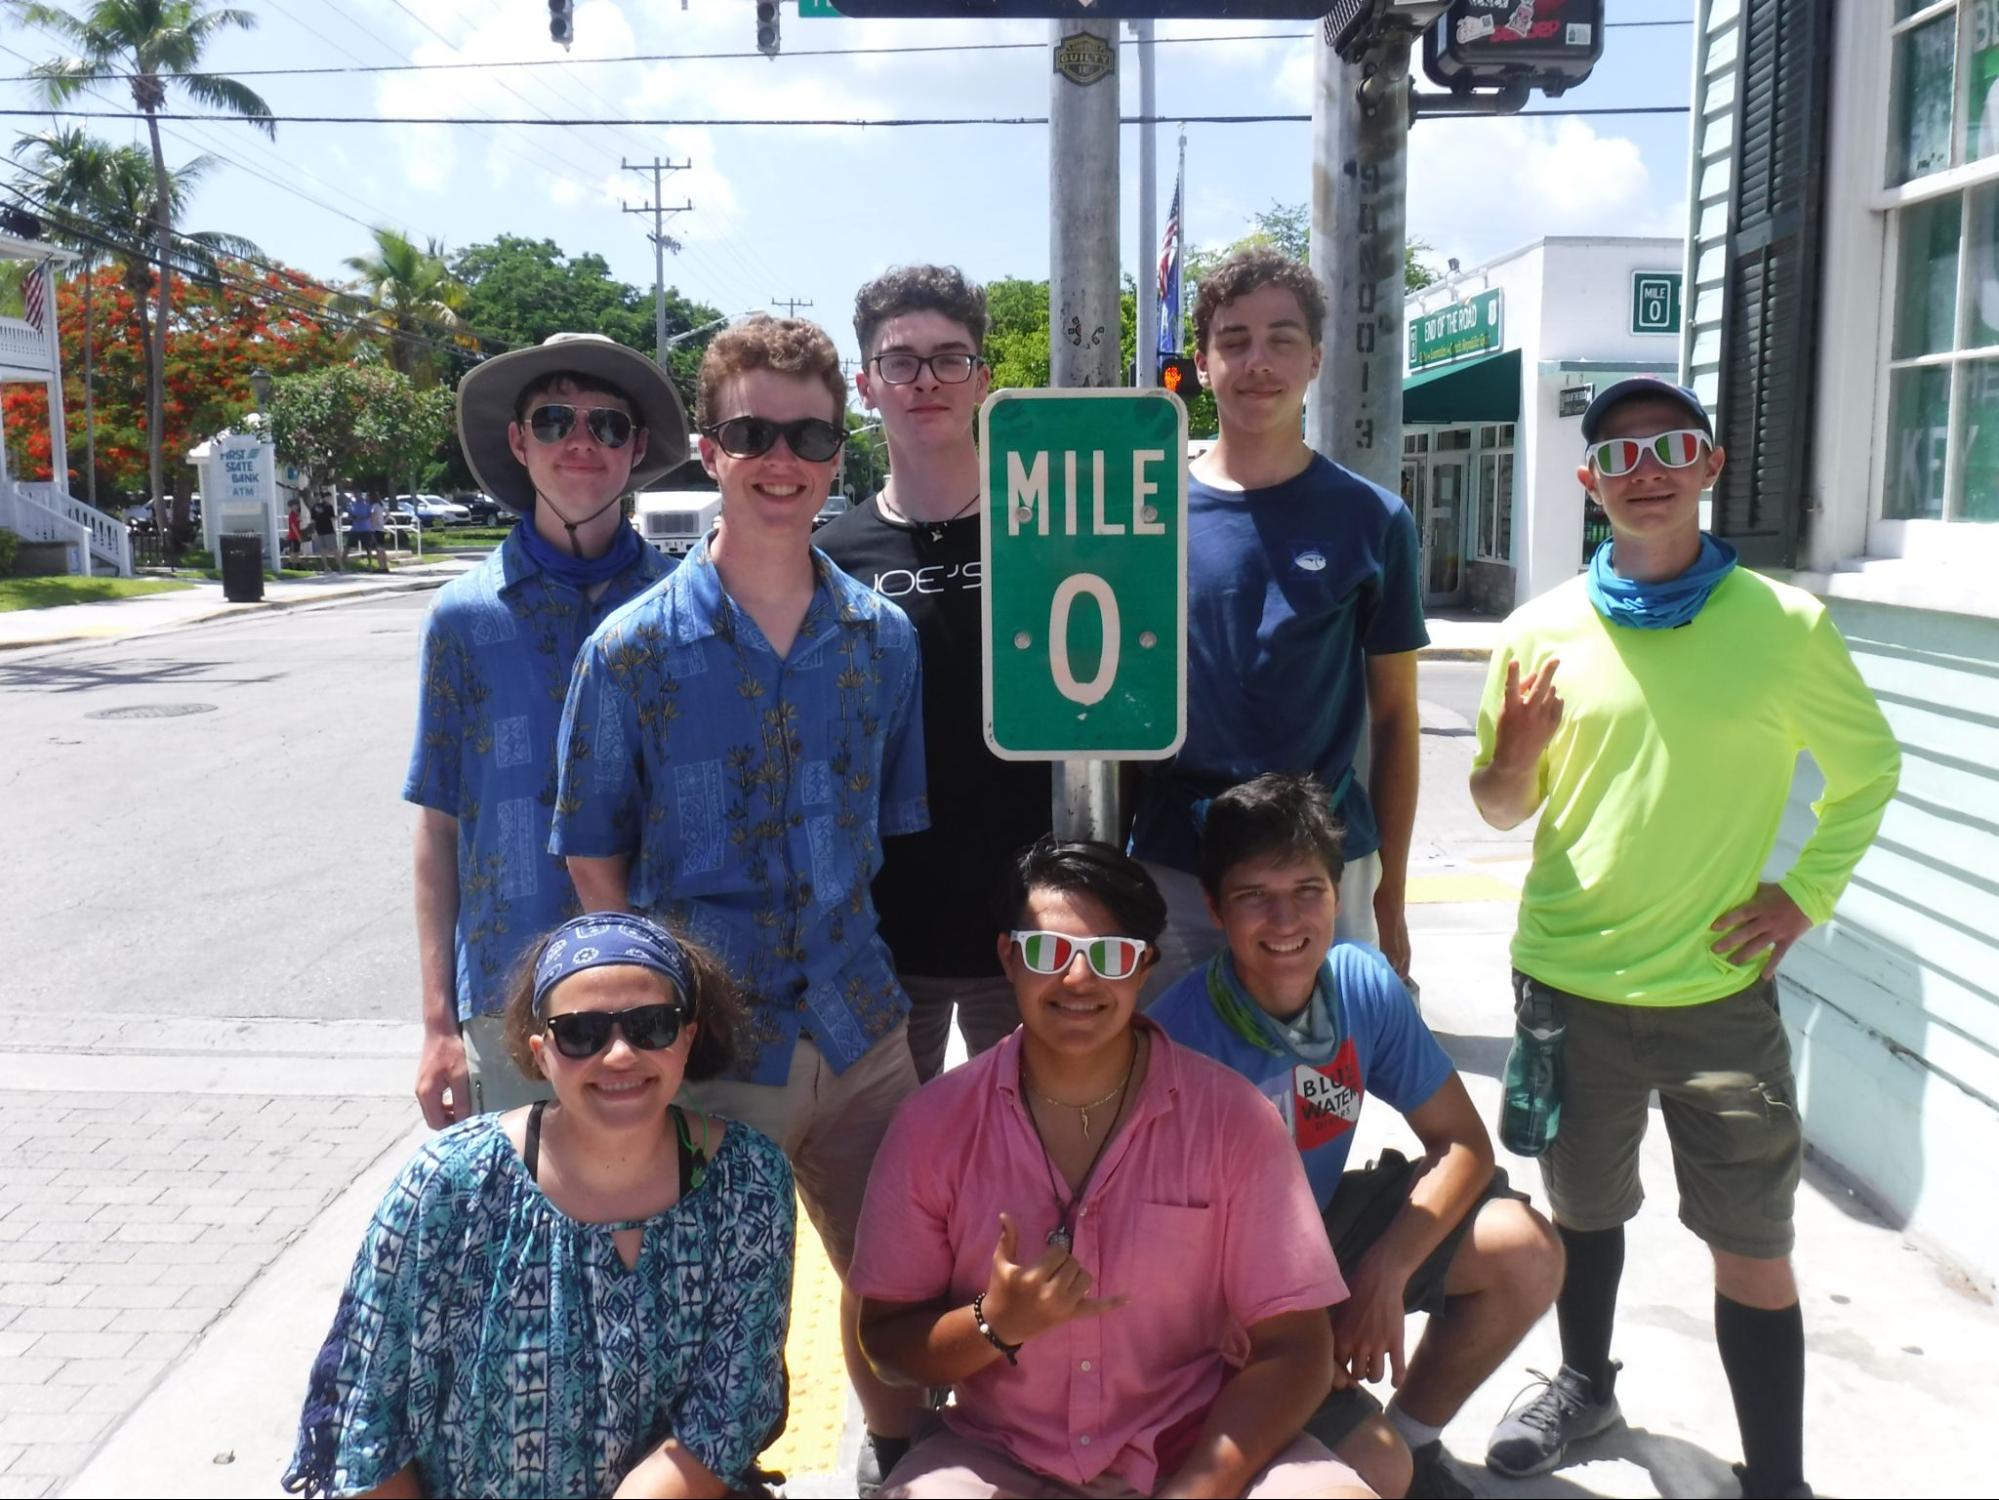 Sarah poses with friends at a sign labeled "Mile 0"